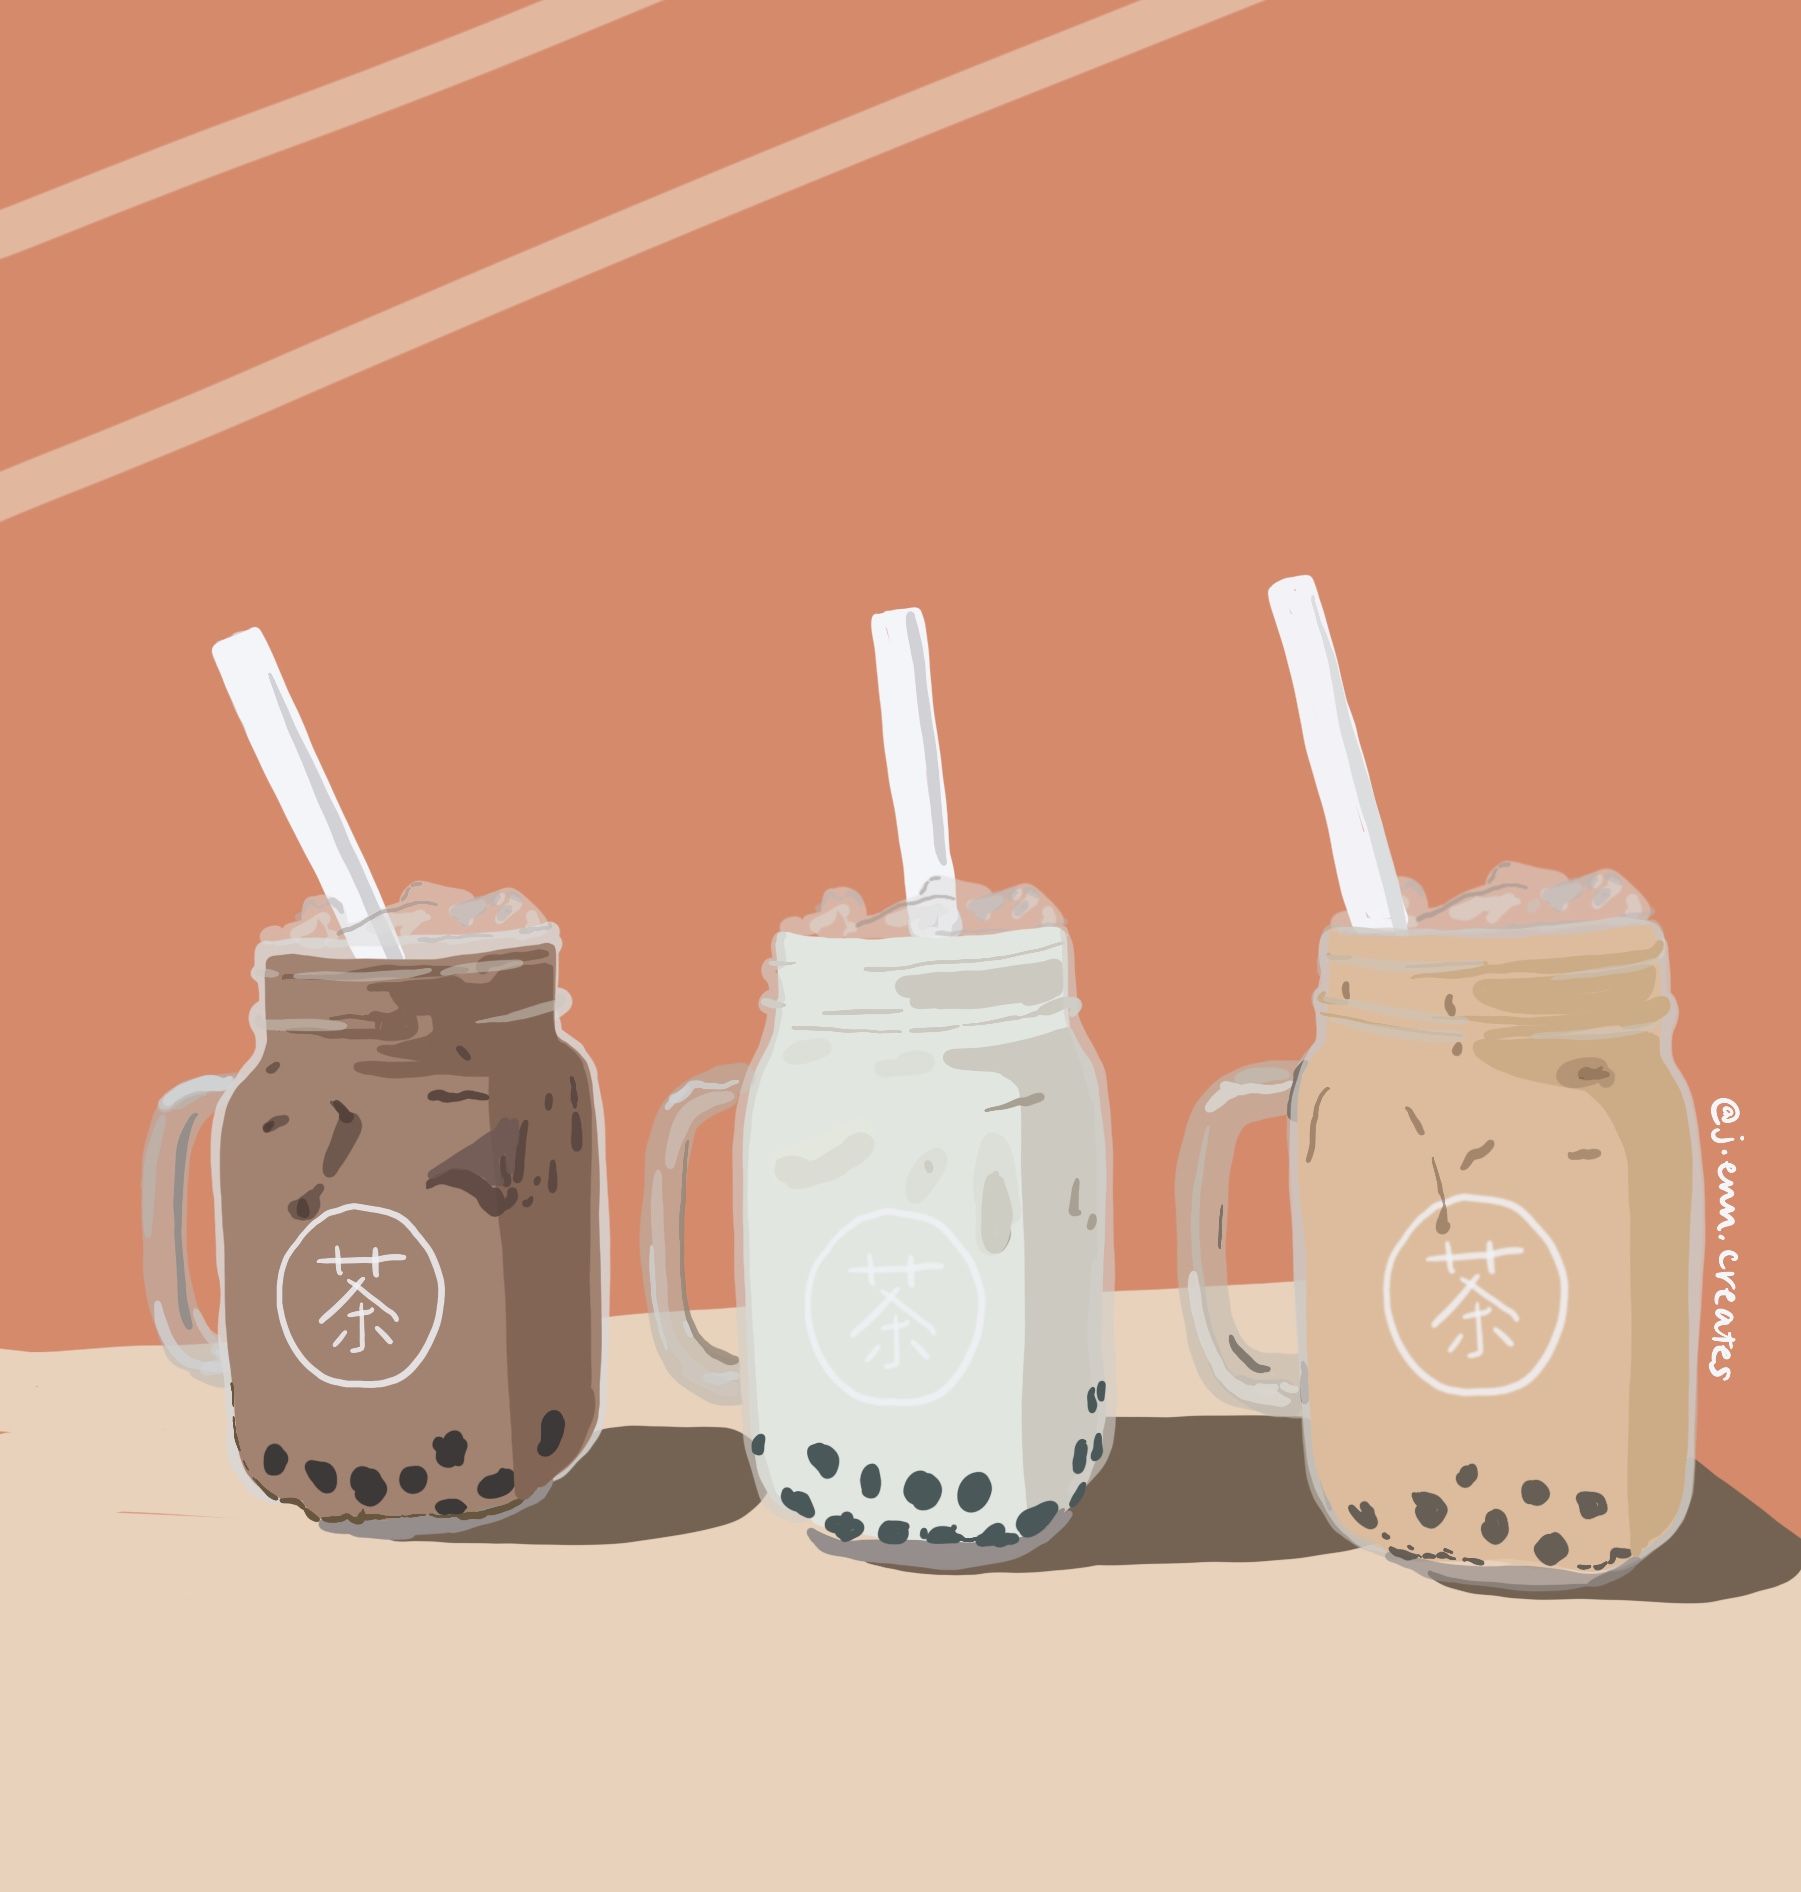 Boba s on